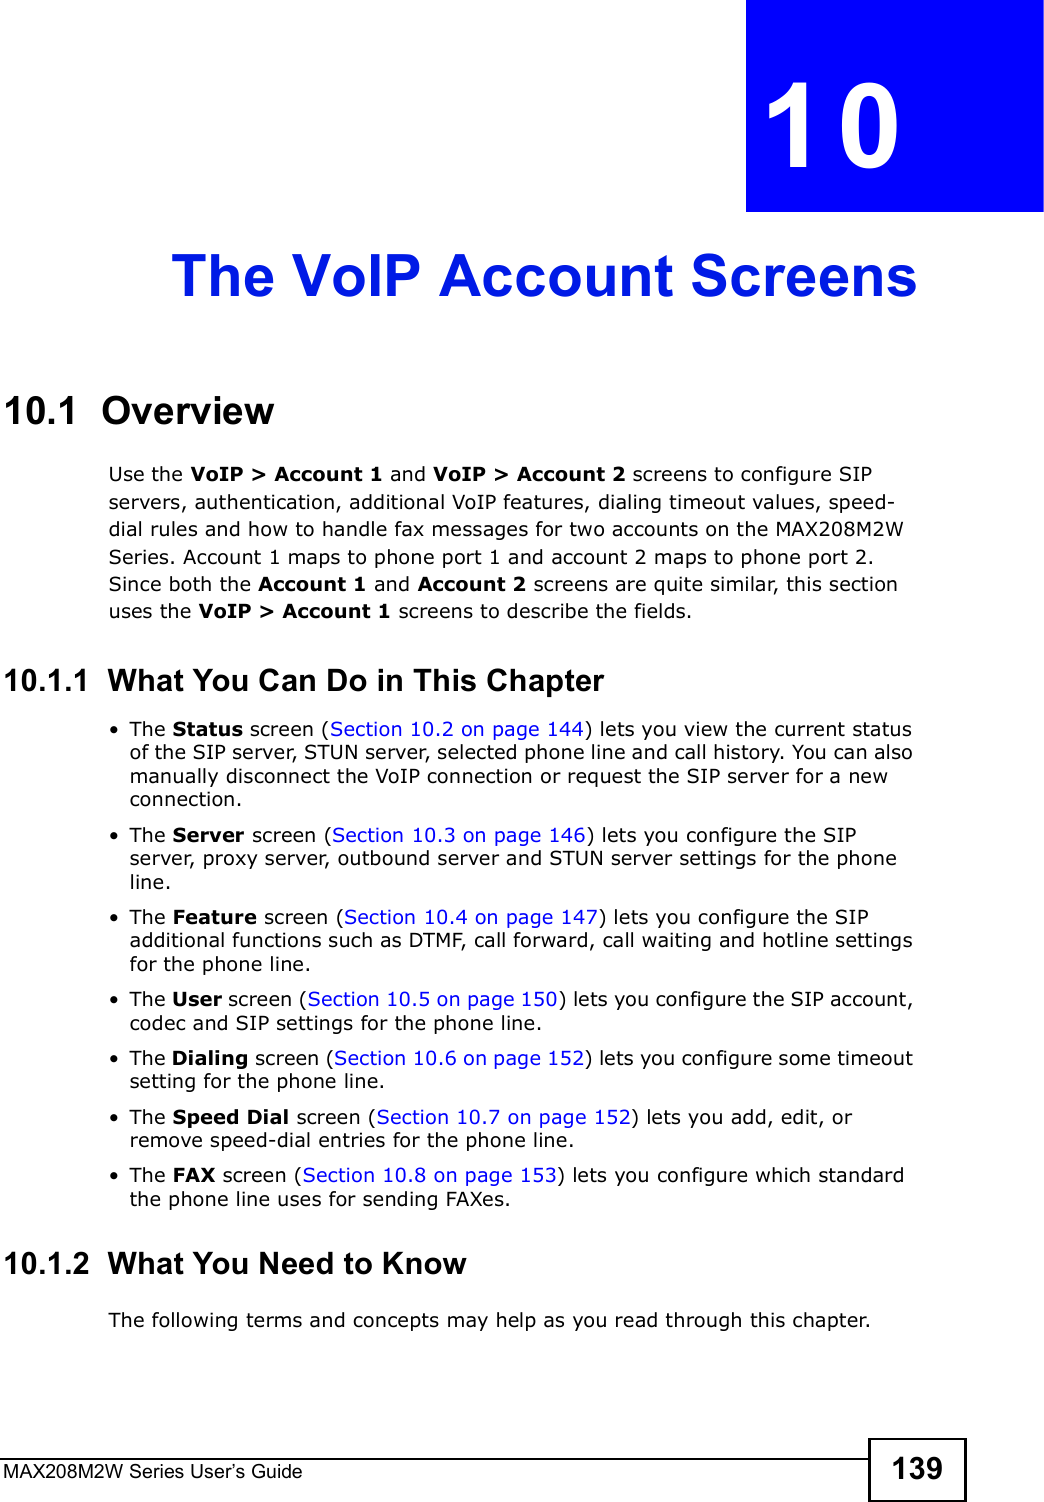 MAX208M2W Series User s Guide 139CHAPTER  10 The VoIP Account Screens10.1  OverviewUse the VoIP &gt; Account 1 and VoIP &gt; Account 2 screens to configure SIP servers, authentication, additional VoIP features, dialing timeout values, speed-dial rules and how to handle fax messages for two accounts on the MAX208M2W Series. Account 1 maps to phone port 1 and account 2 maps to phone port 2. Since both the Account 1 and Account 2 screens are quite similar, this section uses the VoIP &gt; Account 1 screens to describe the fields.10.1.1  What You Can Do in This Chapter!The Status screen (Section 10.2 on page 144) lets you view the current status of the SIP server, STUN server, selected phone line and call history. You can also manually disconnect the VoIP connection or request the SIP server for a new connection.!The Server screen (Section 10.3 on page 146) lets you configure the SIP server, proxy server, outbound server and STUN server settings for the phone line.!The Feature screen (Section 10.4 on page 147) lets you configure the SIP additional functions such as DTMF, call forward, call waiting and hotline settings for the phone line.!The User screen (Section 10.5 on page 150) lets you configure the SIP account, codec and SIP settings for the phone line.!The Dialing screen (Section 10.6 on page 152) lets you configure some timeout setting for the phone line.!The Speed Dial screen (Section 10.7 on page 152) lets you add, edit, or remove speed-dial entries for the phone line.!The FAX screen (Section 10.8 on page 153) lets you configure which standard the phone line uses for sending FAXes.10.1.2  What You Need to KnowThe following terms and concepts may help as you read through this chapter.